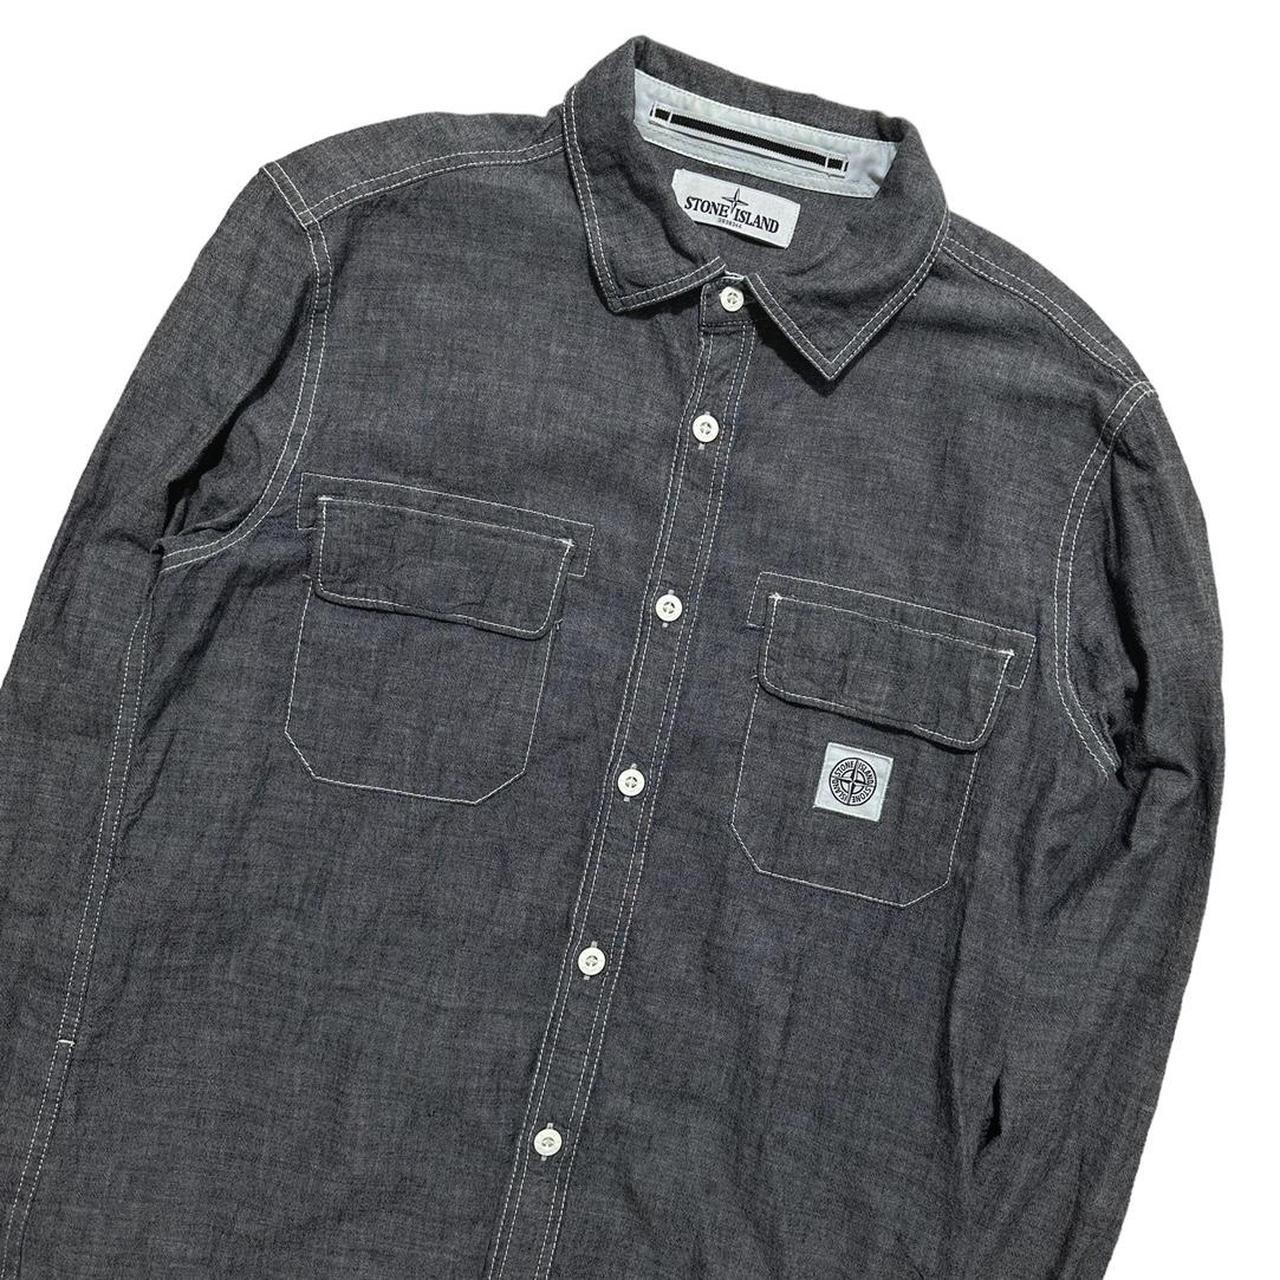 Stone Island Grey Button Up Shirt - Known Source